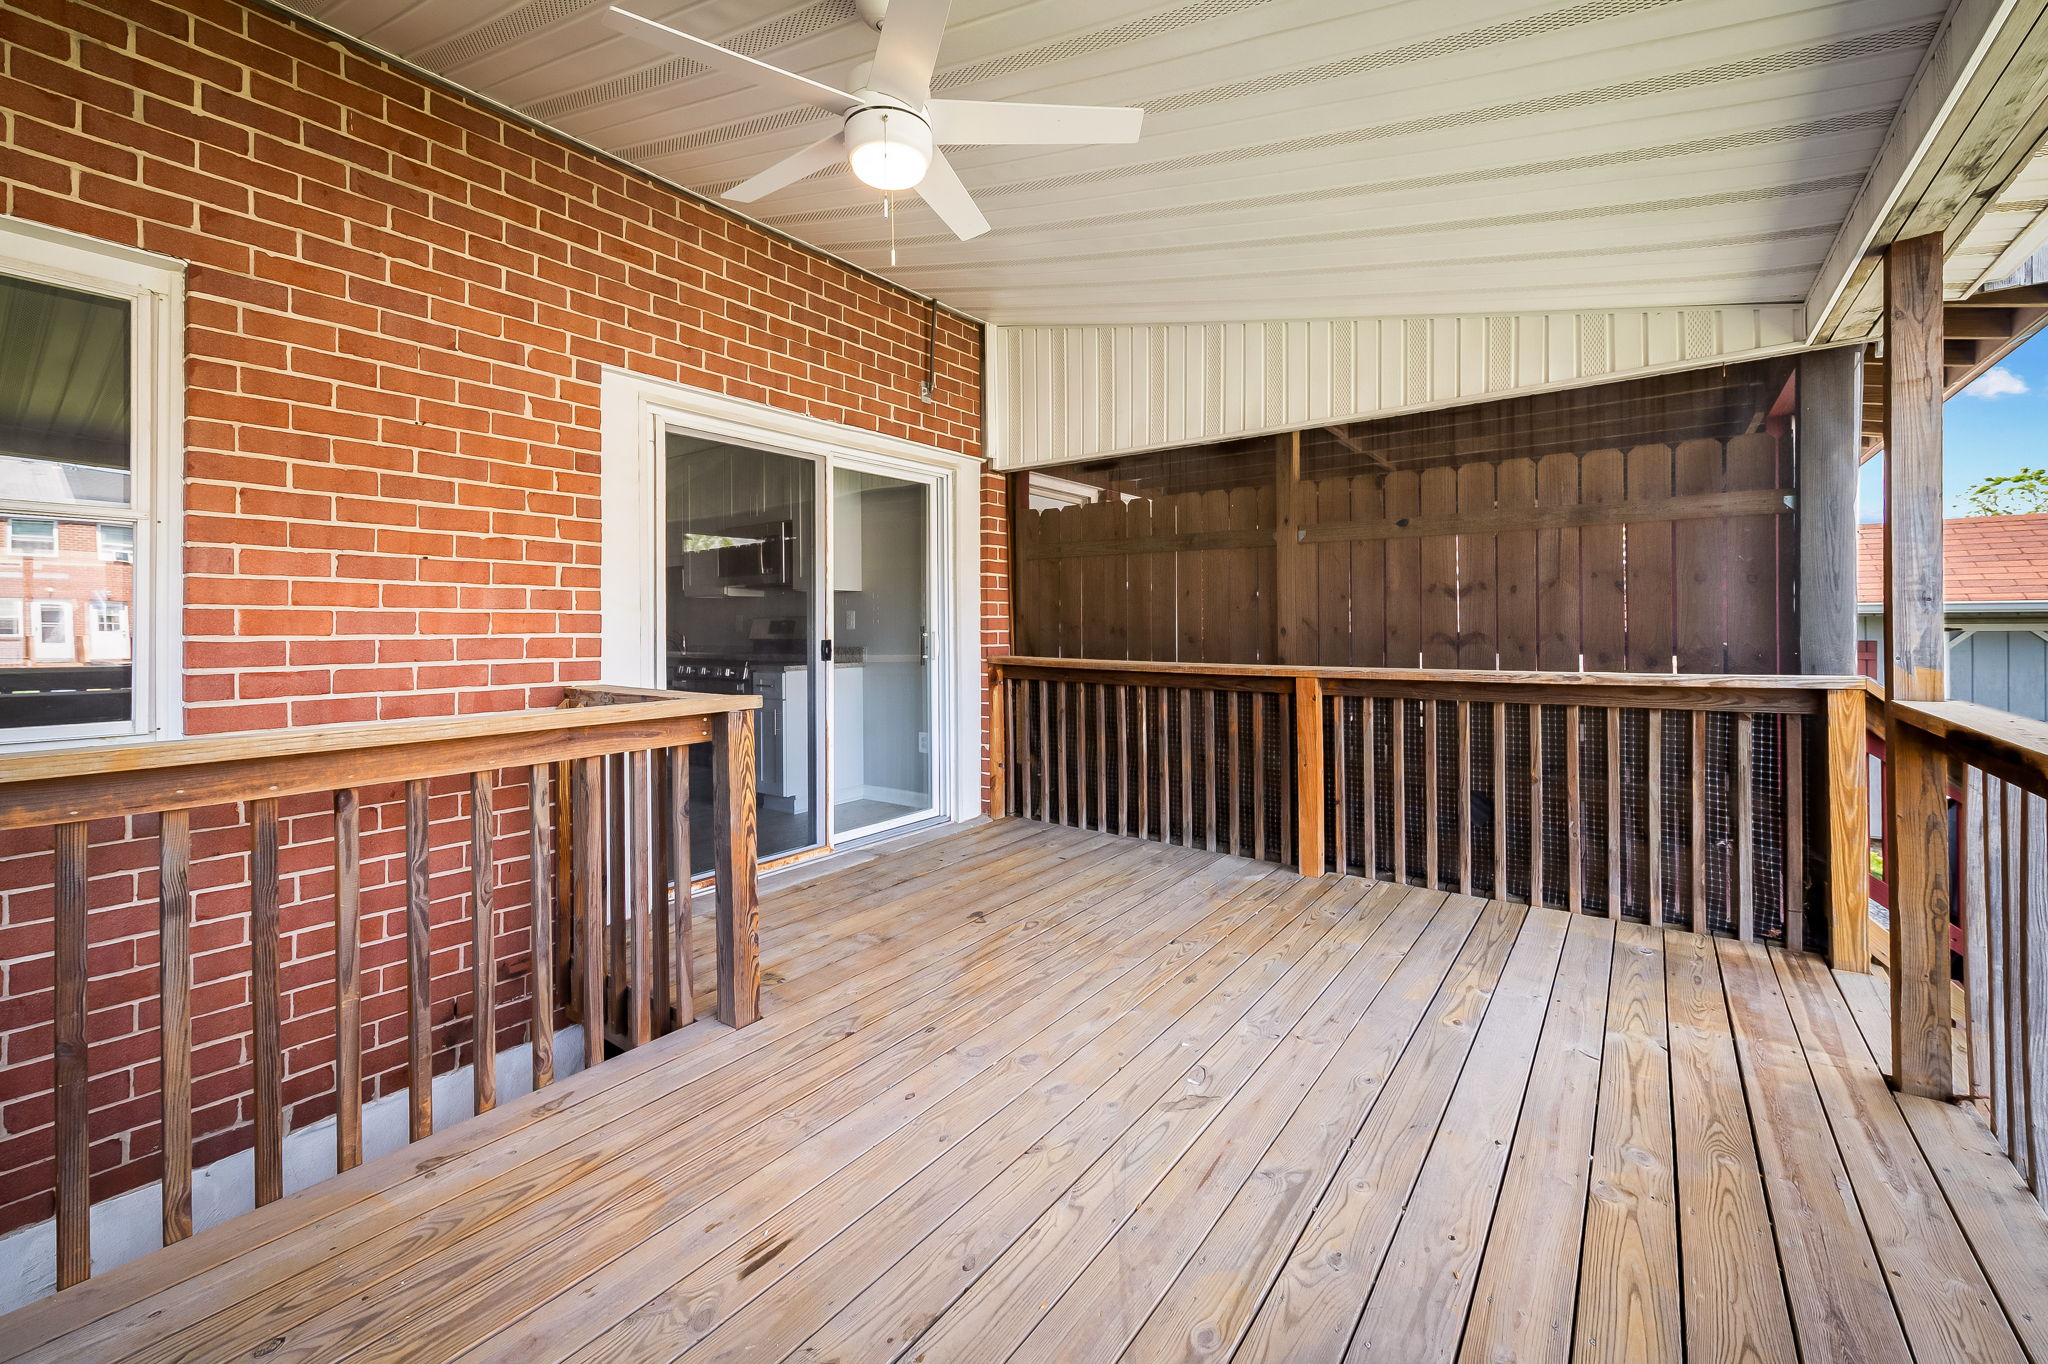 751 Seawall Road, covered deck with ceiling fan.